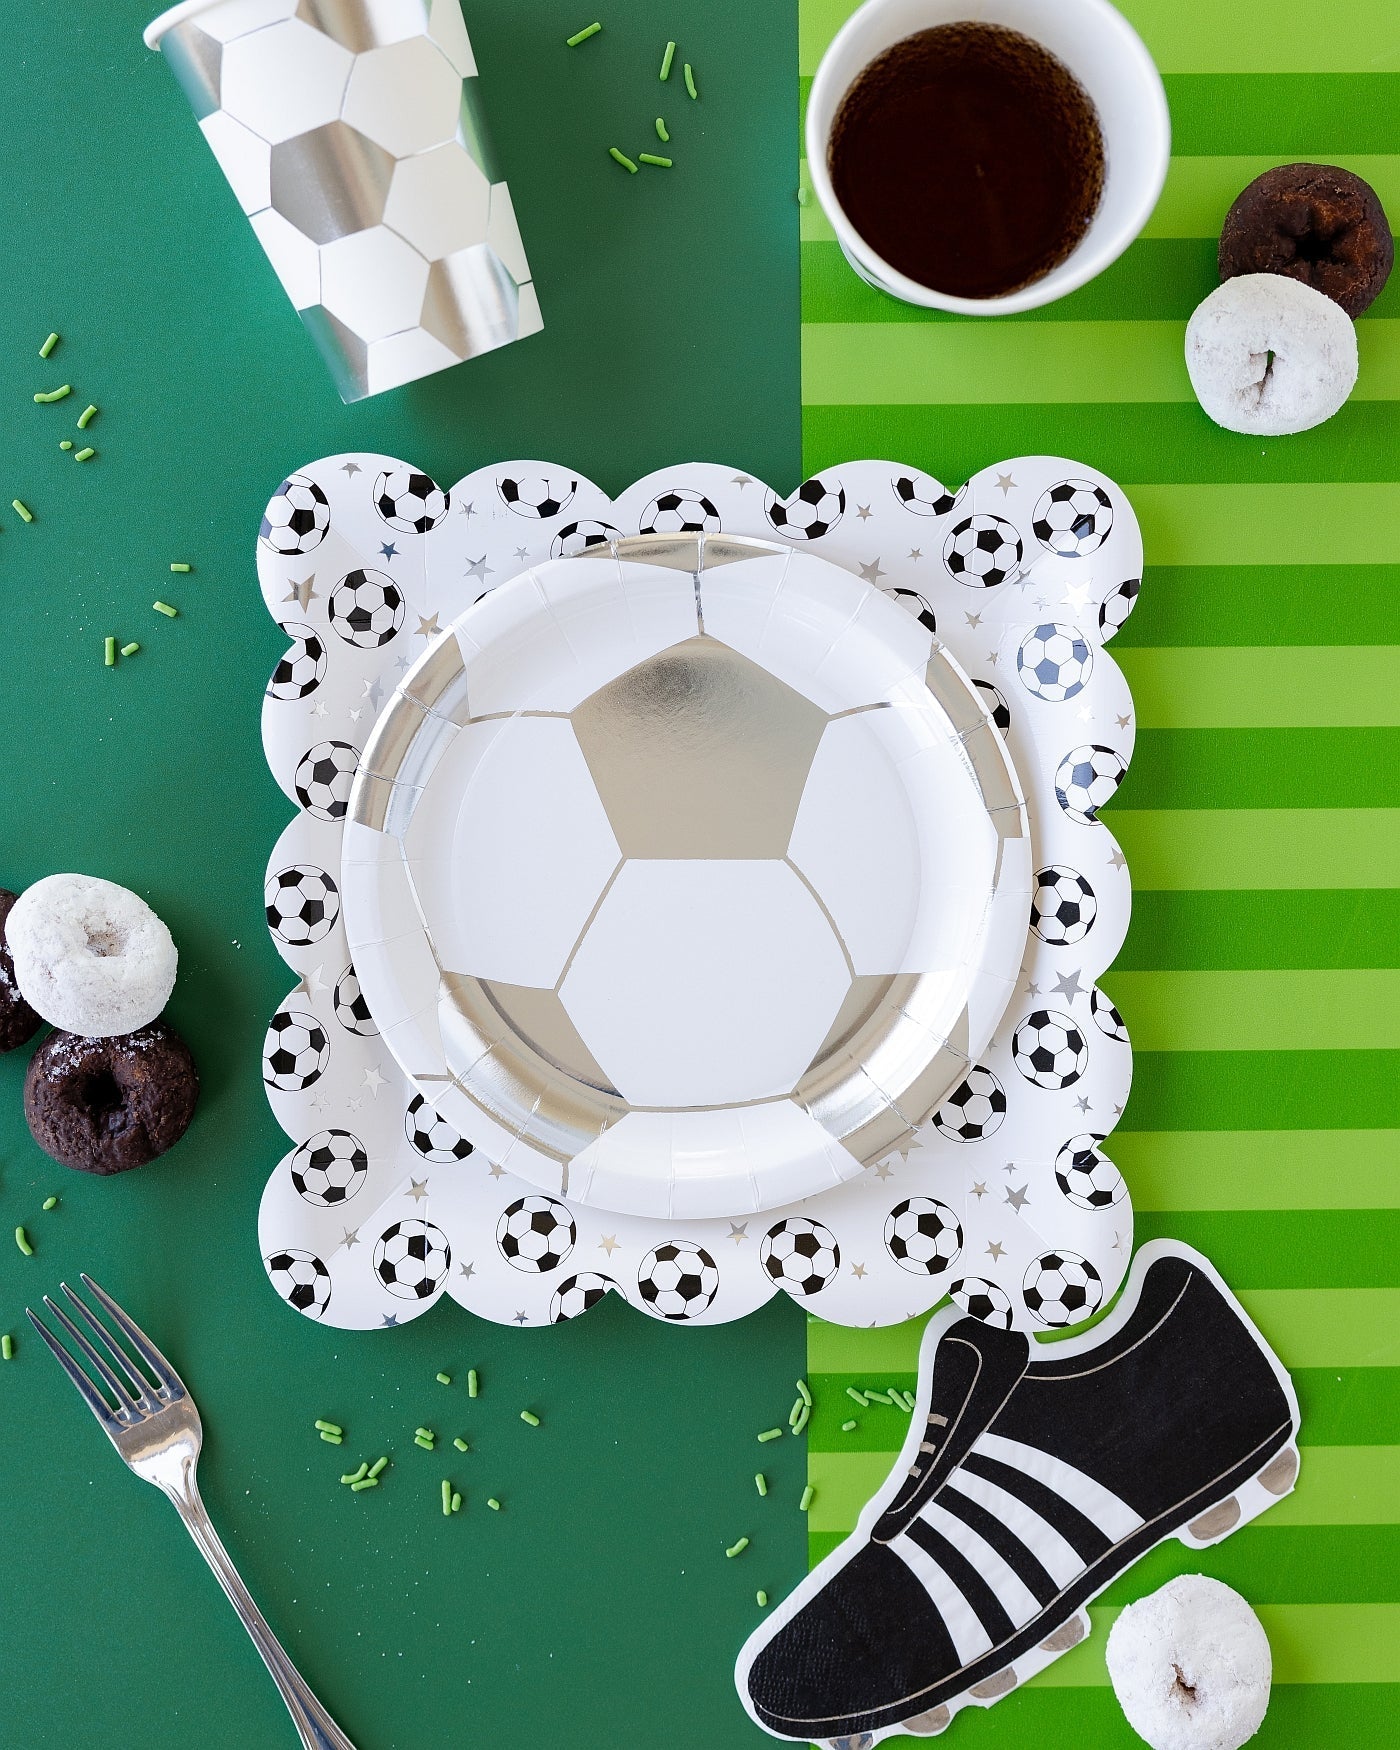 Striped Soccer Field Paper Table Runner 10ft | The Party Darling